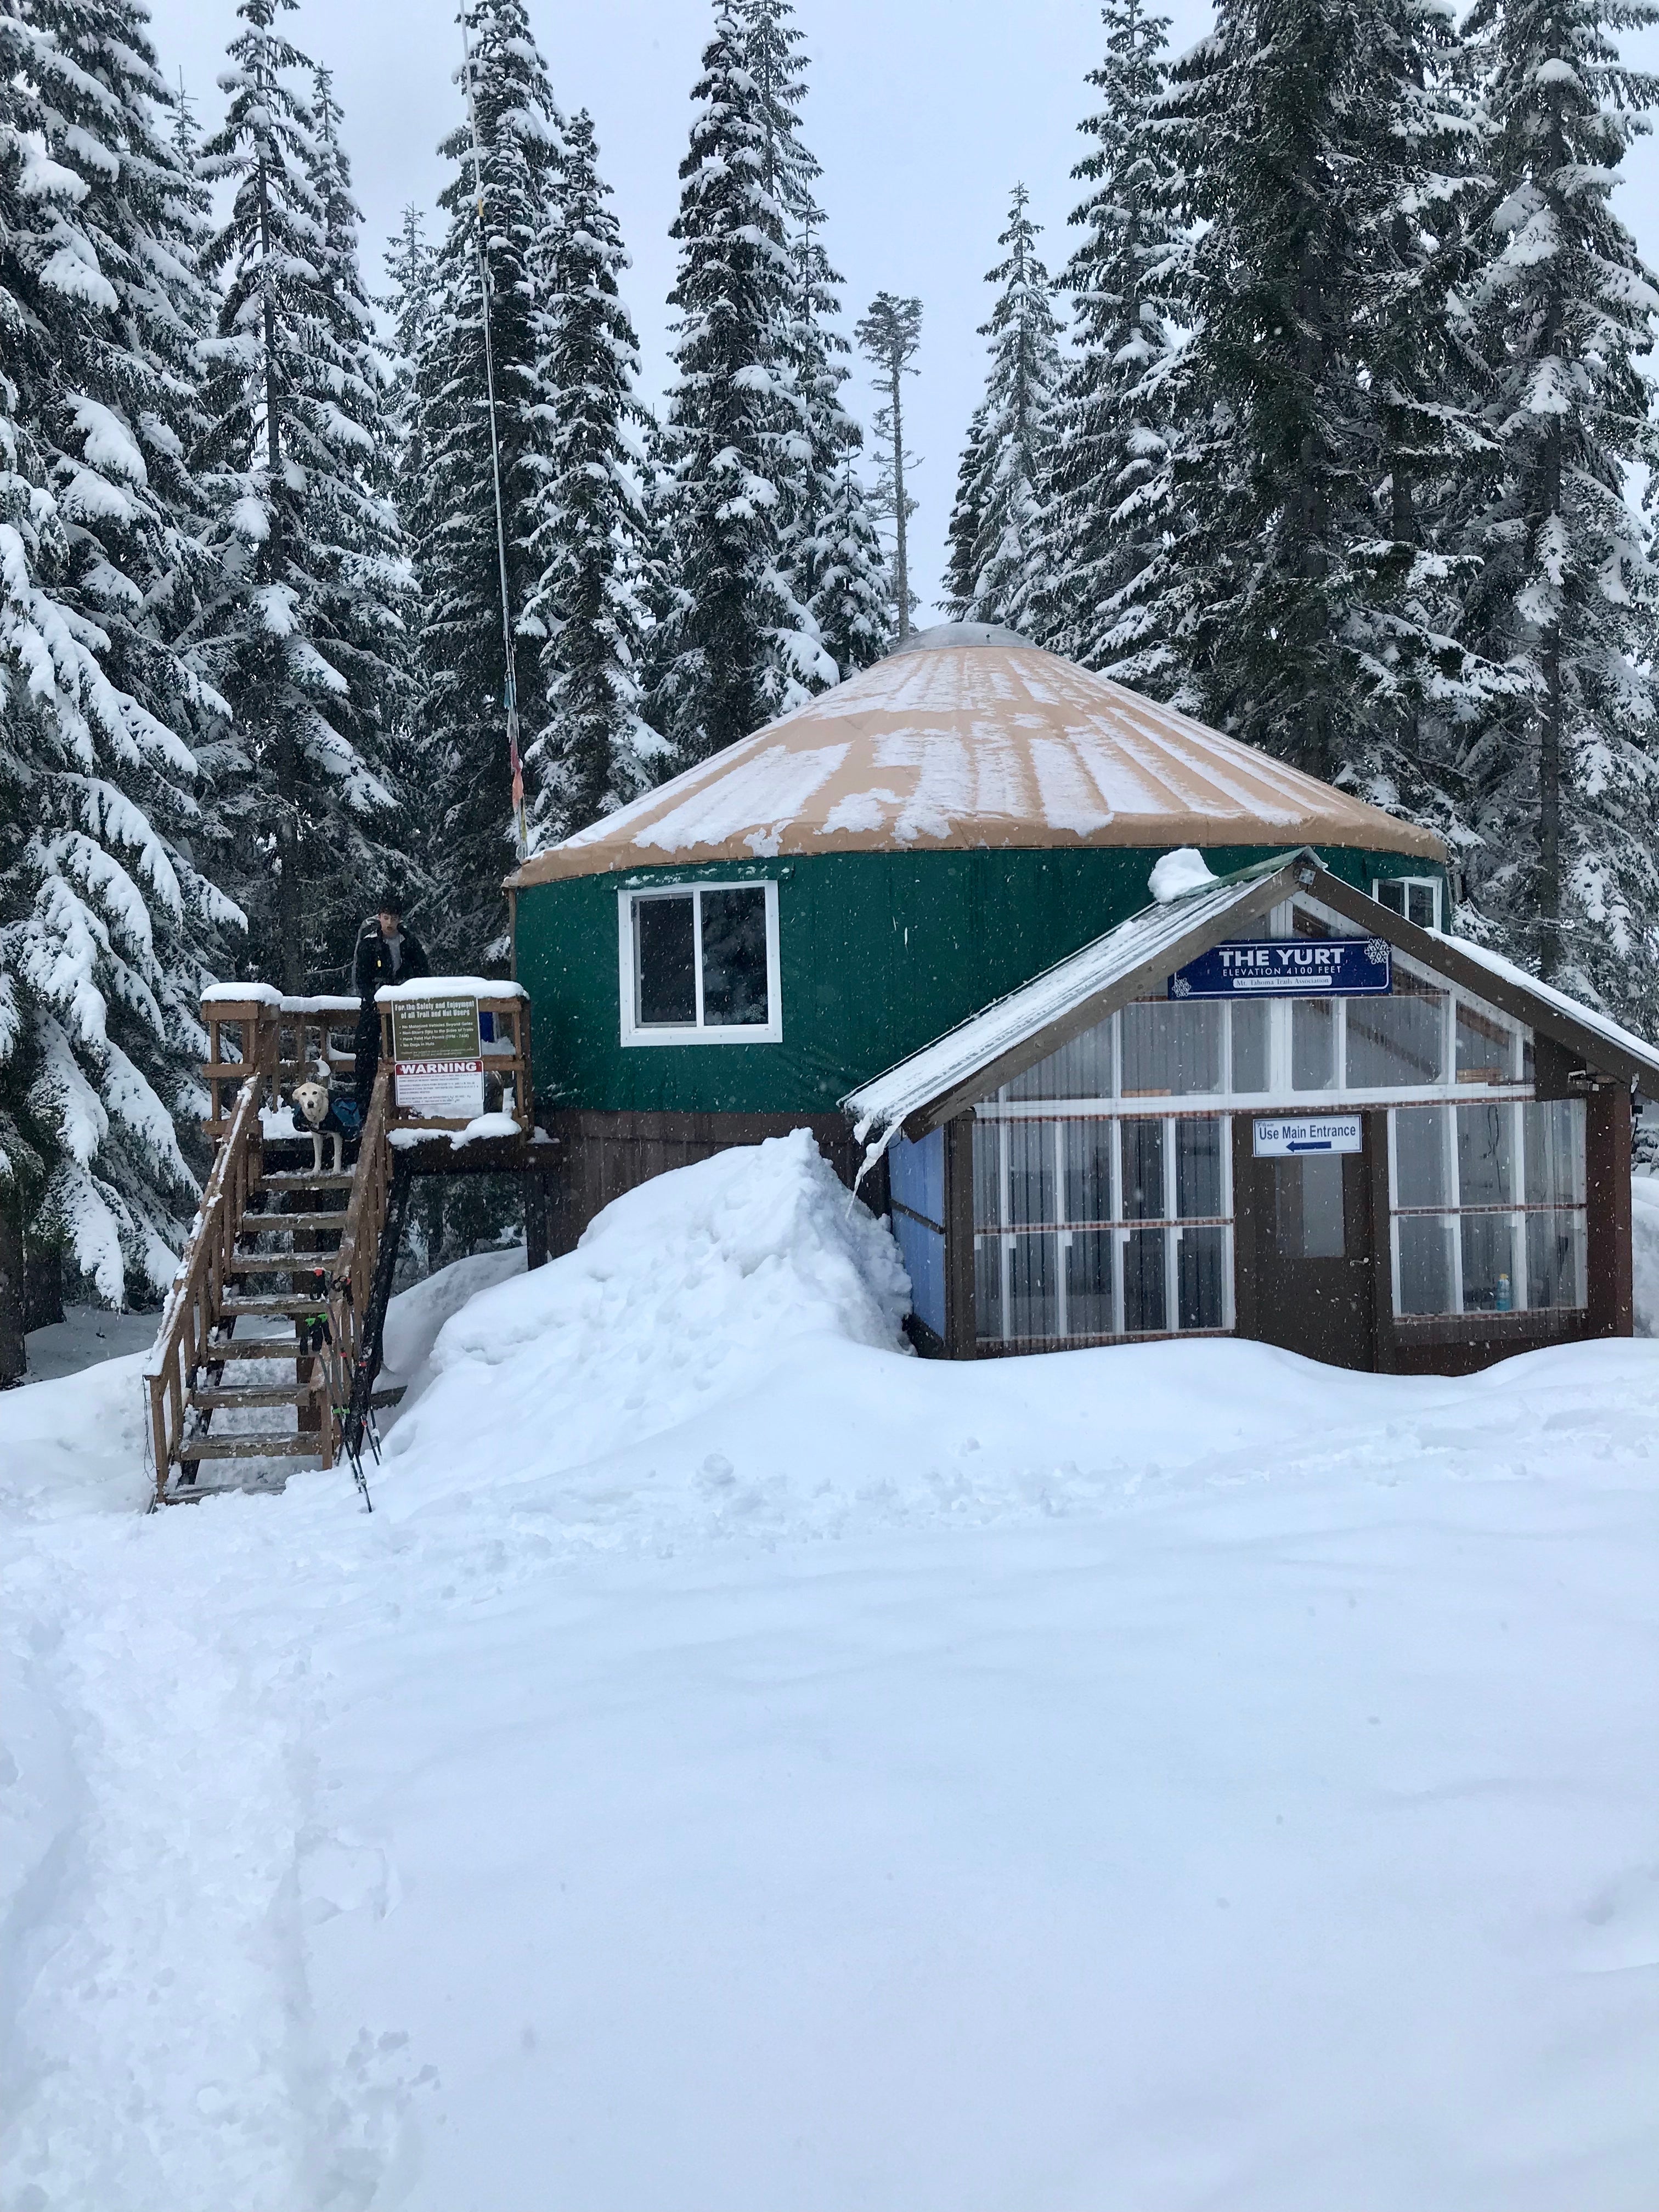 Camper submitted image from Yurt Snowshoe - 5